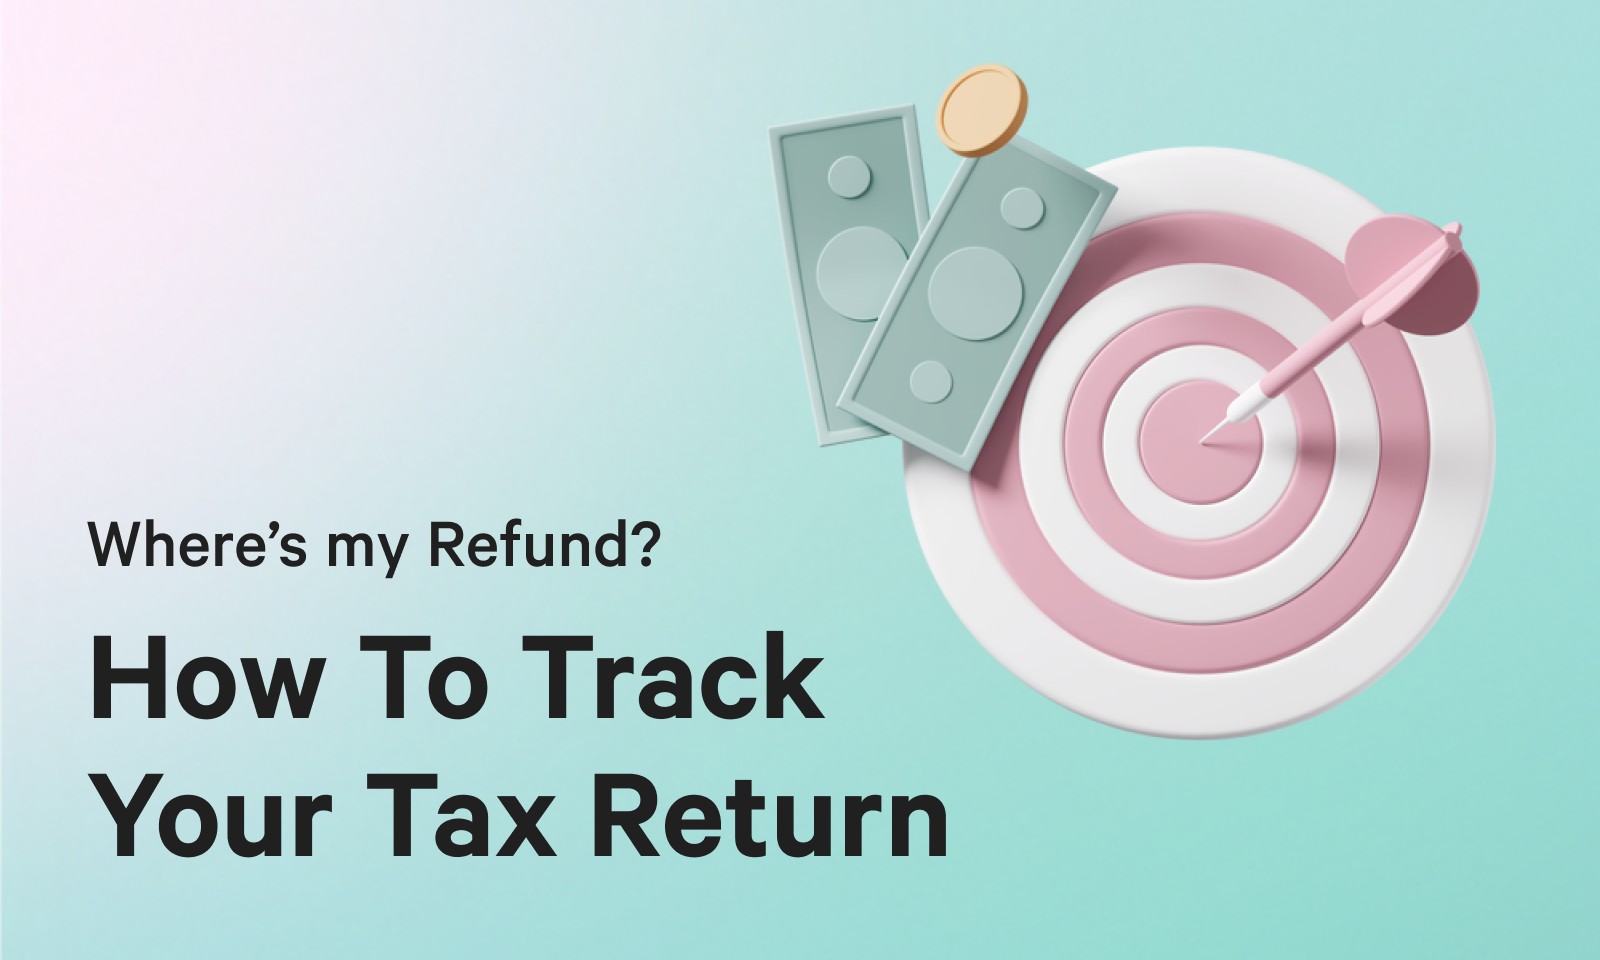 Where's My Refund? How To Track Your Tax Return